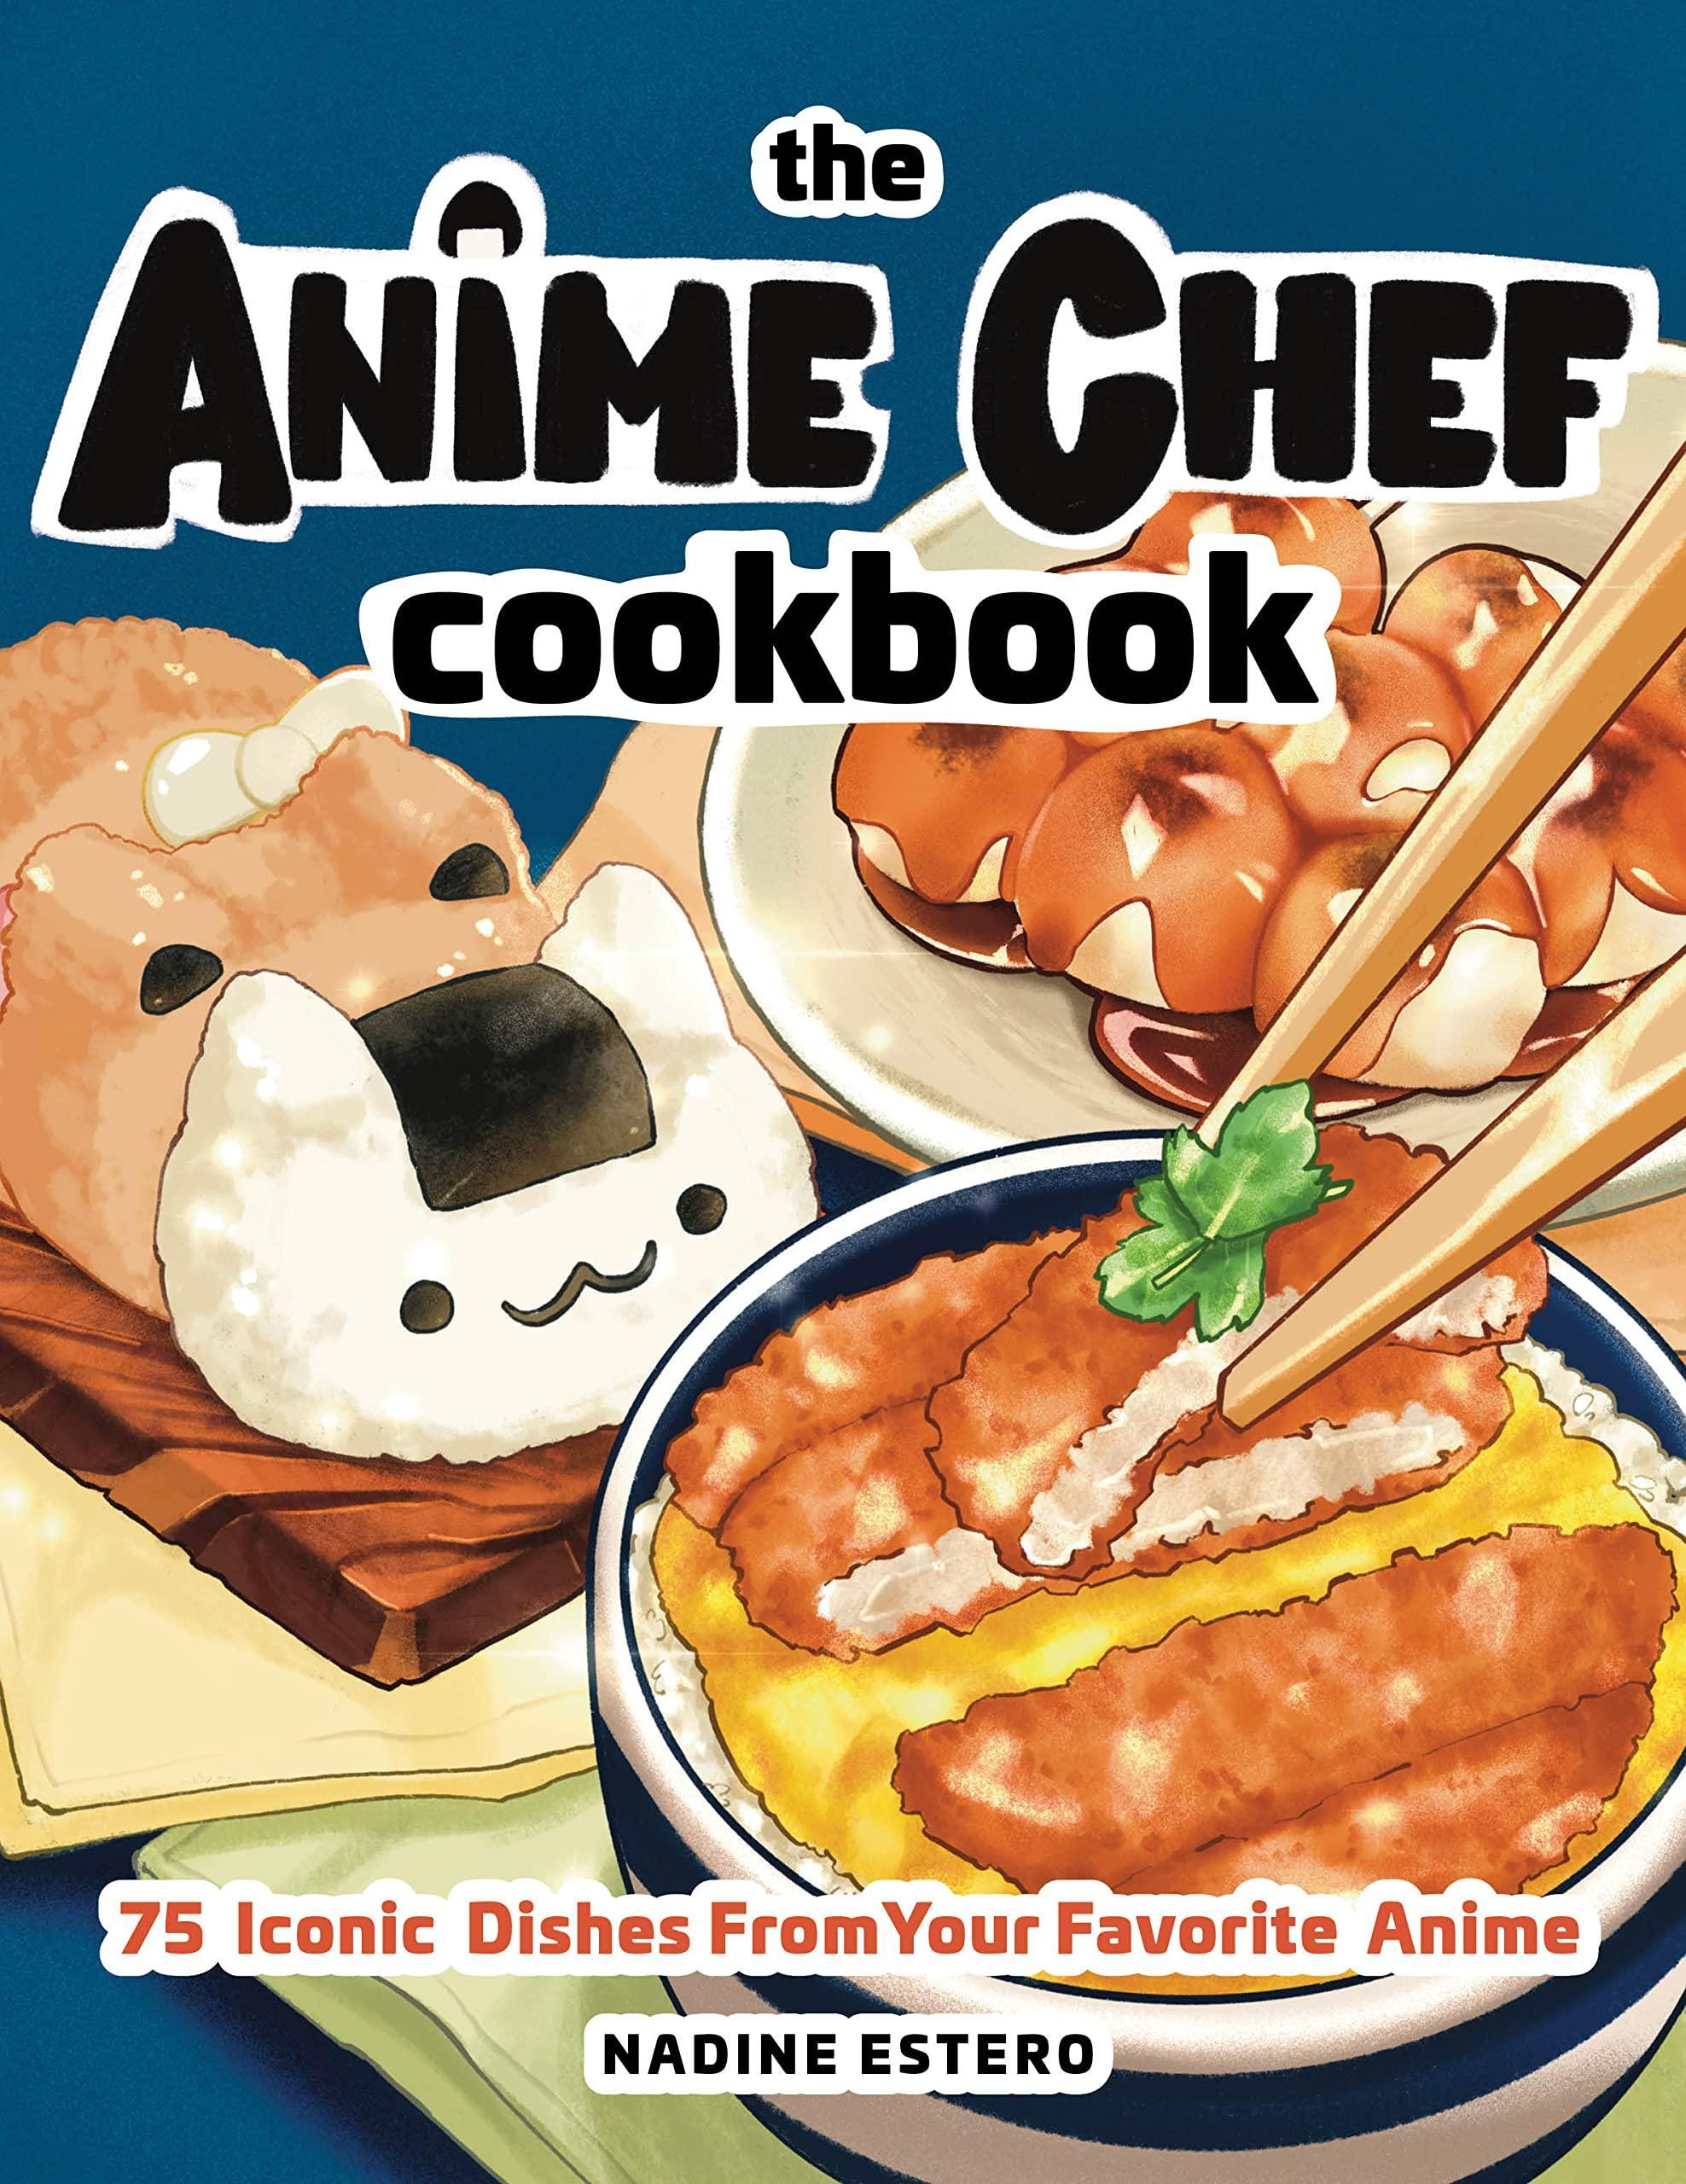 The Anime Chef Cookbook: 75 Iconic Dishes from Your Favorite Anime (Novelty) - Tankobonbon